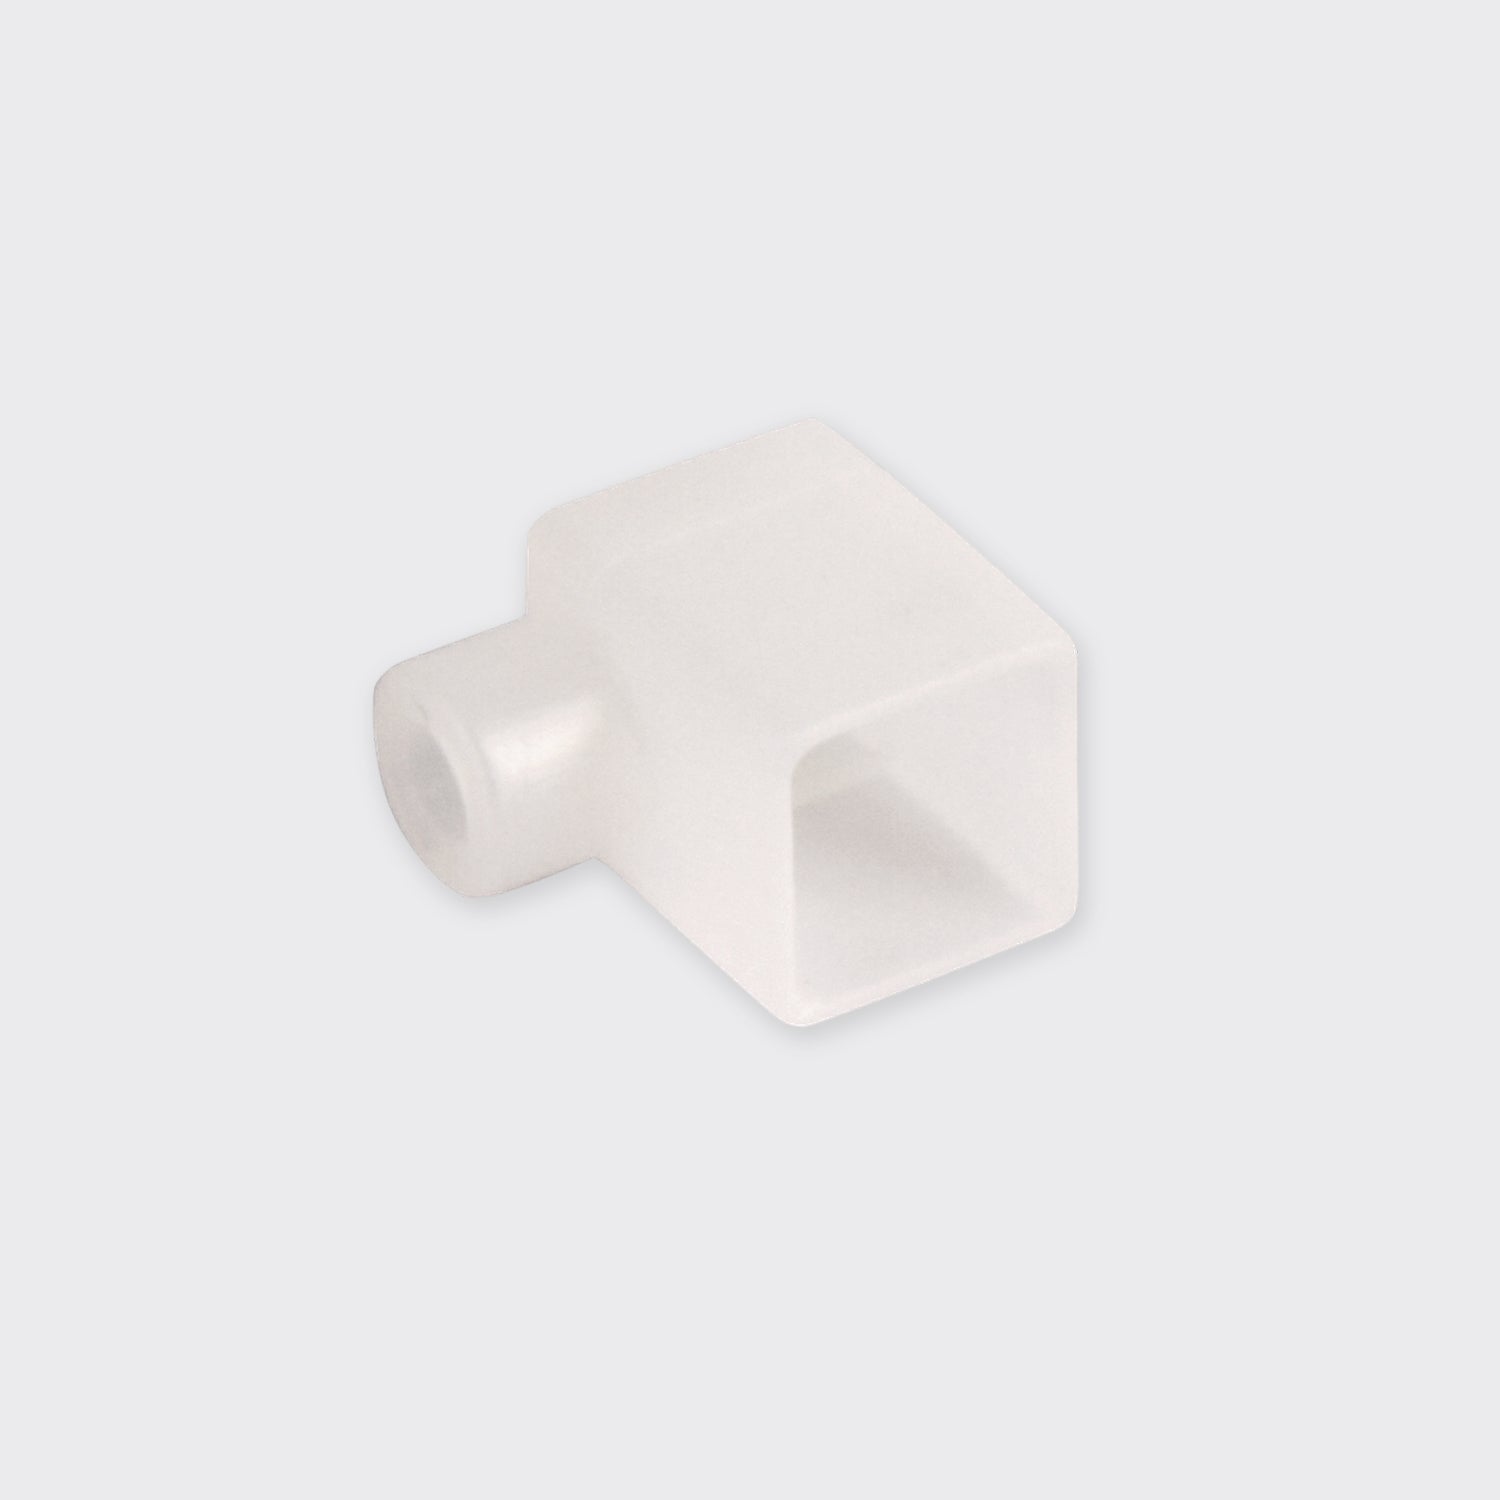 Encapsulated | SHEER | IP66 Connectors